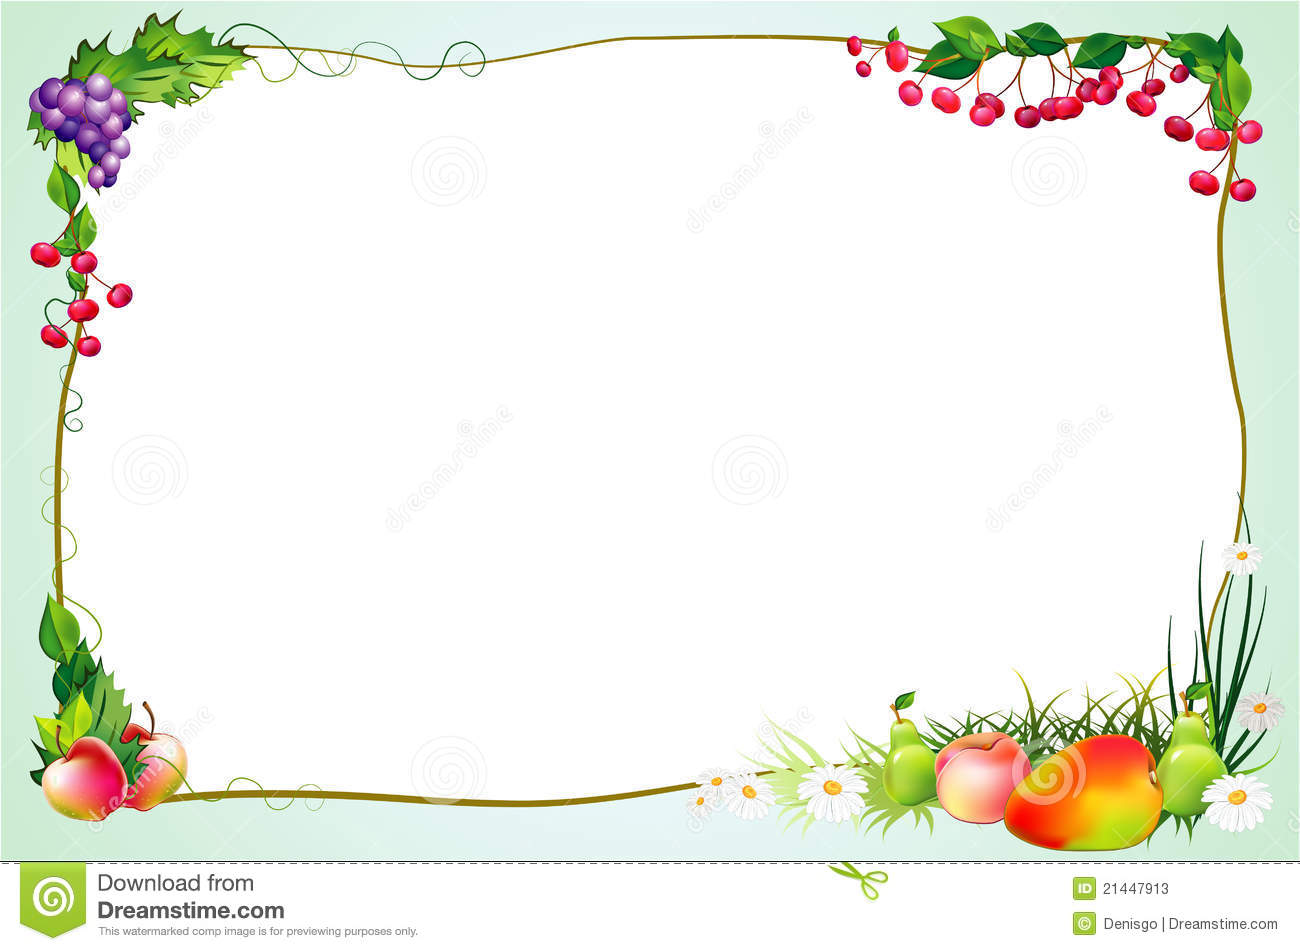 Diet Border With Fruits And Flowers Stock Photos   Image  21447913